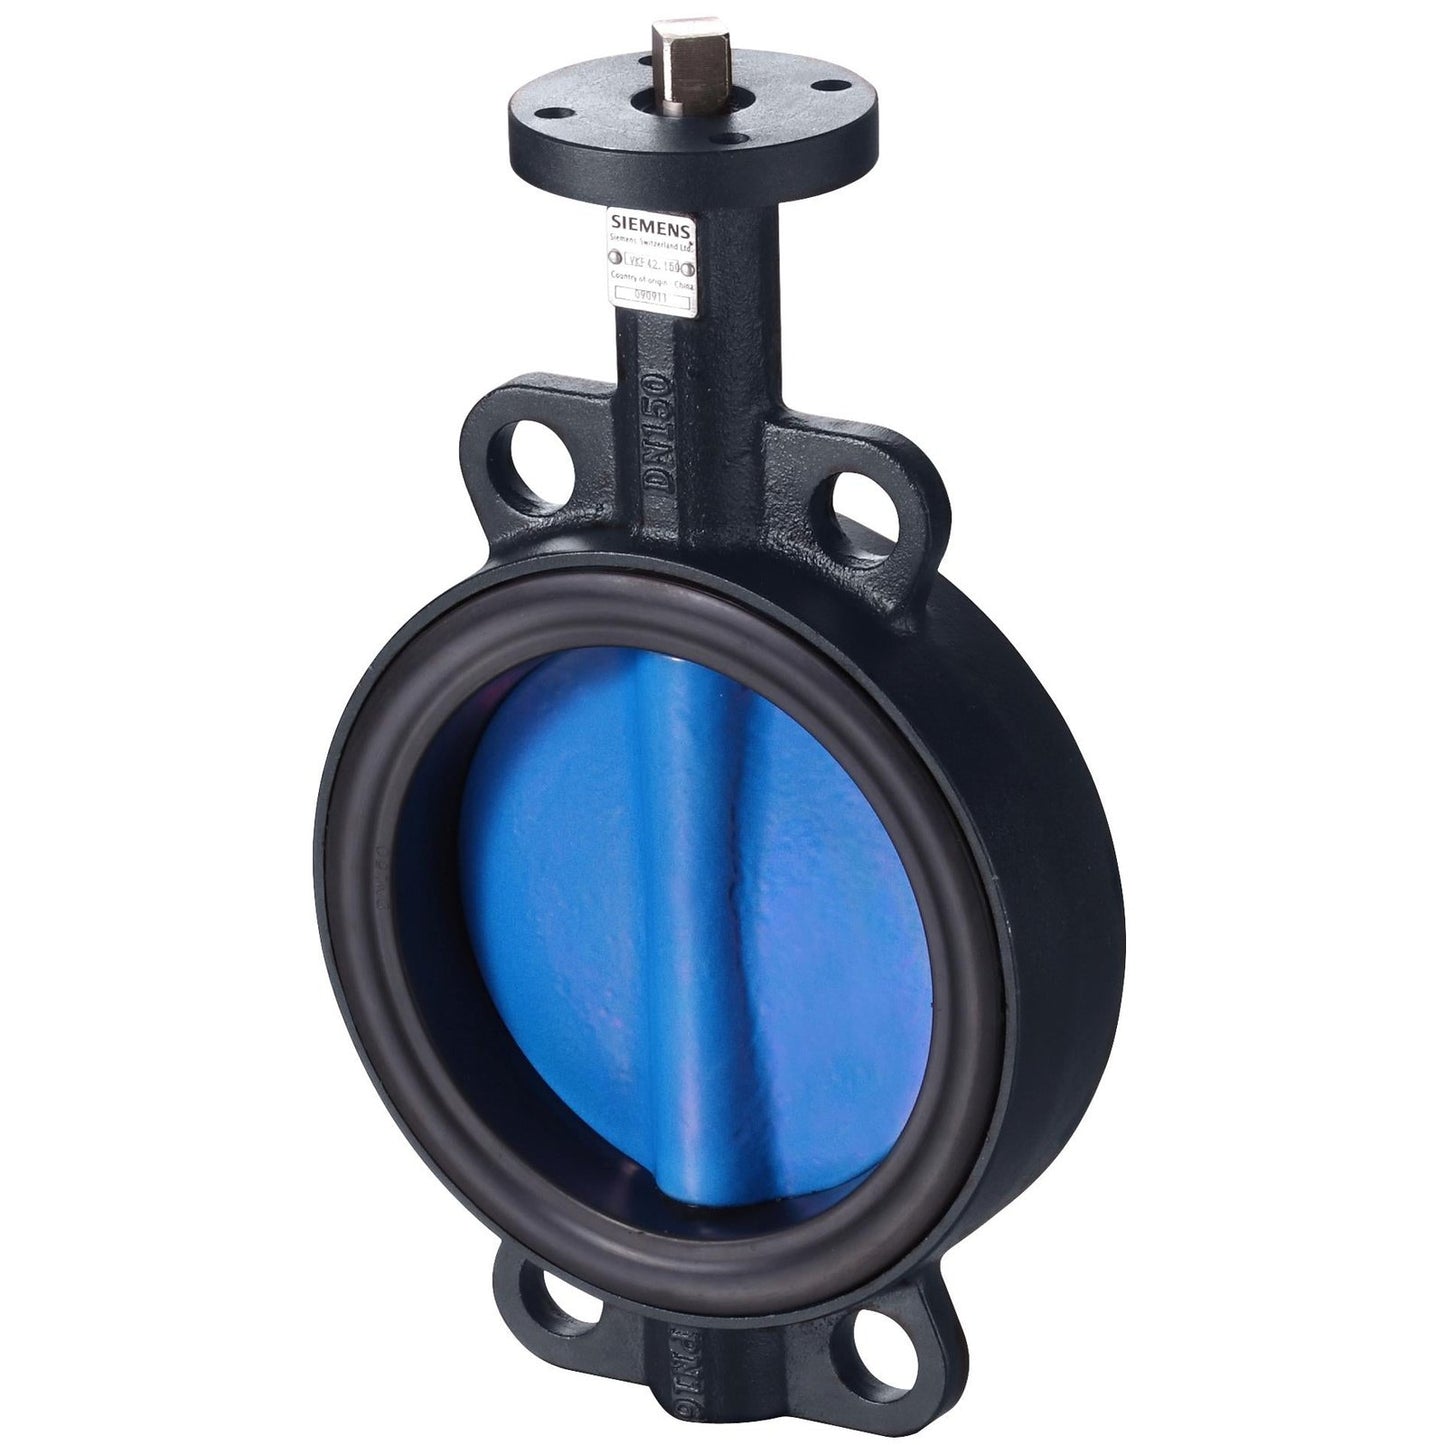 VKF42.80 Butterfly valves PN16 for flanged connections, with tight shutoff